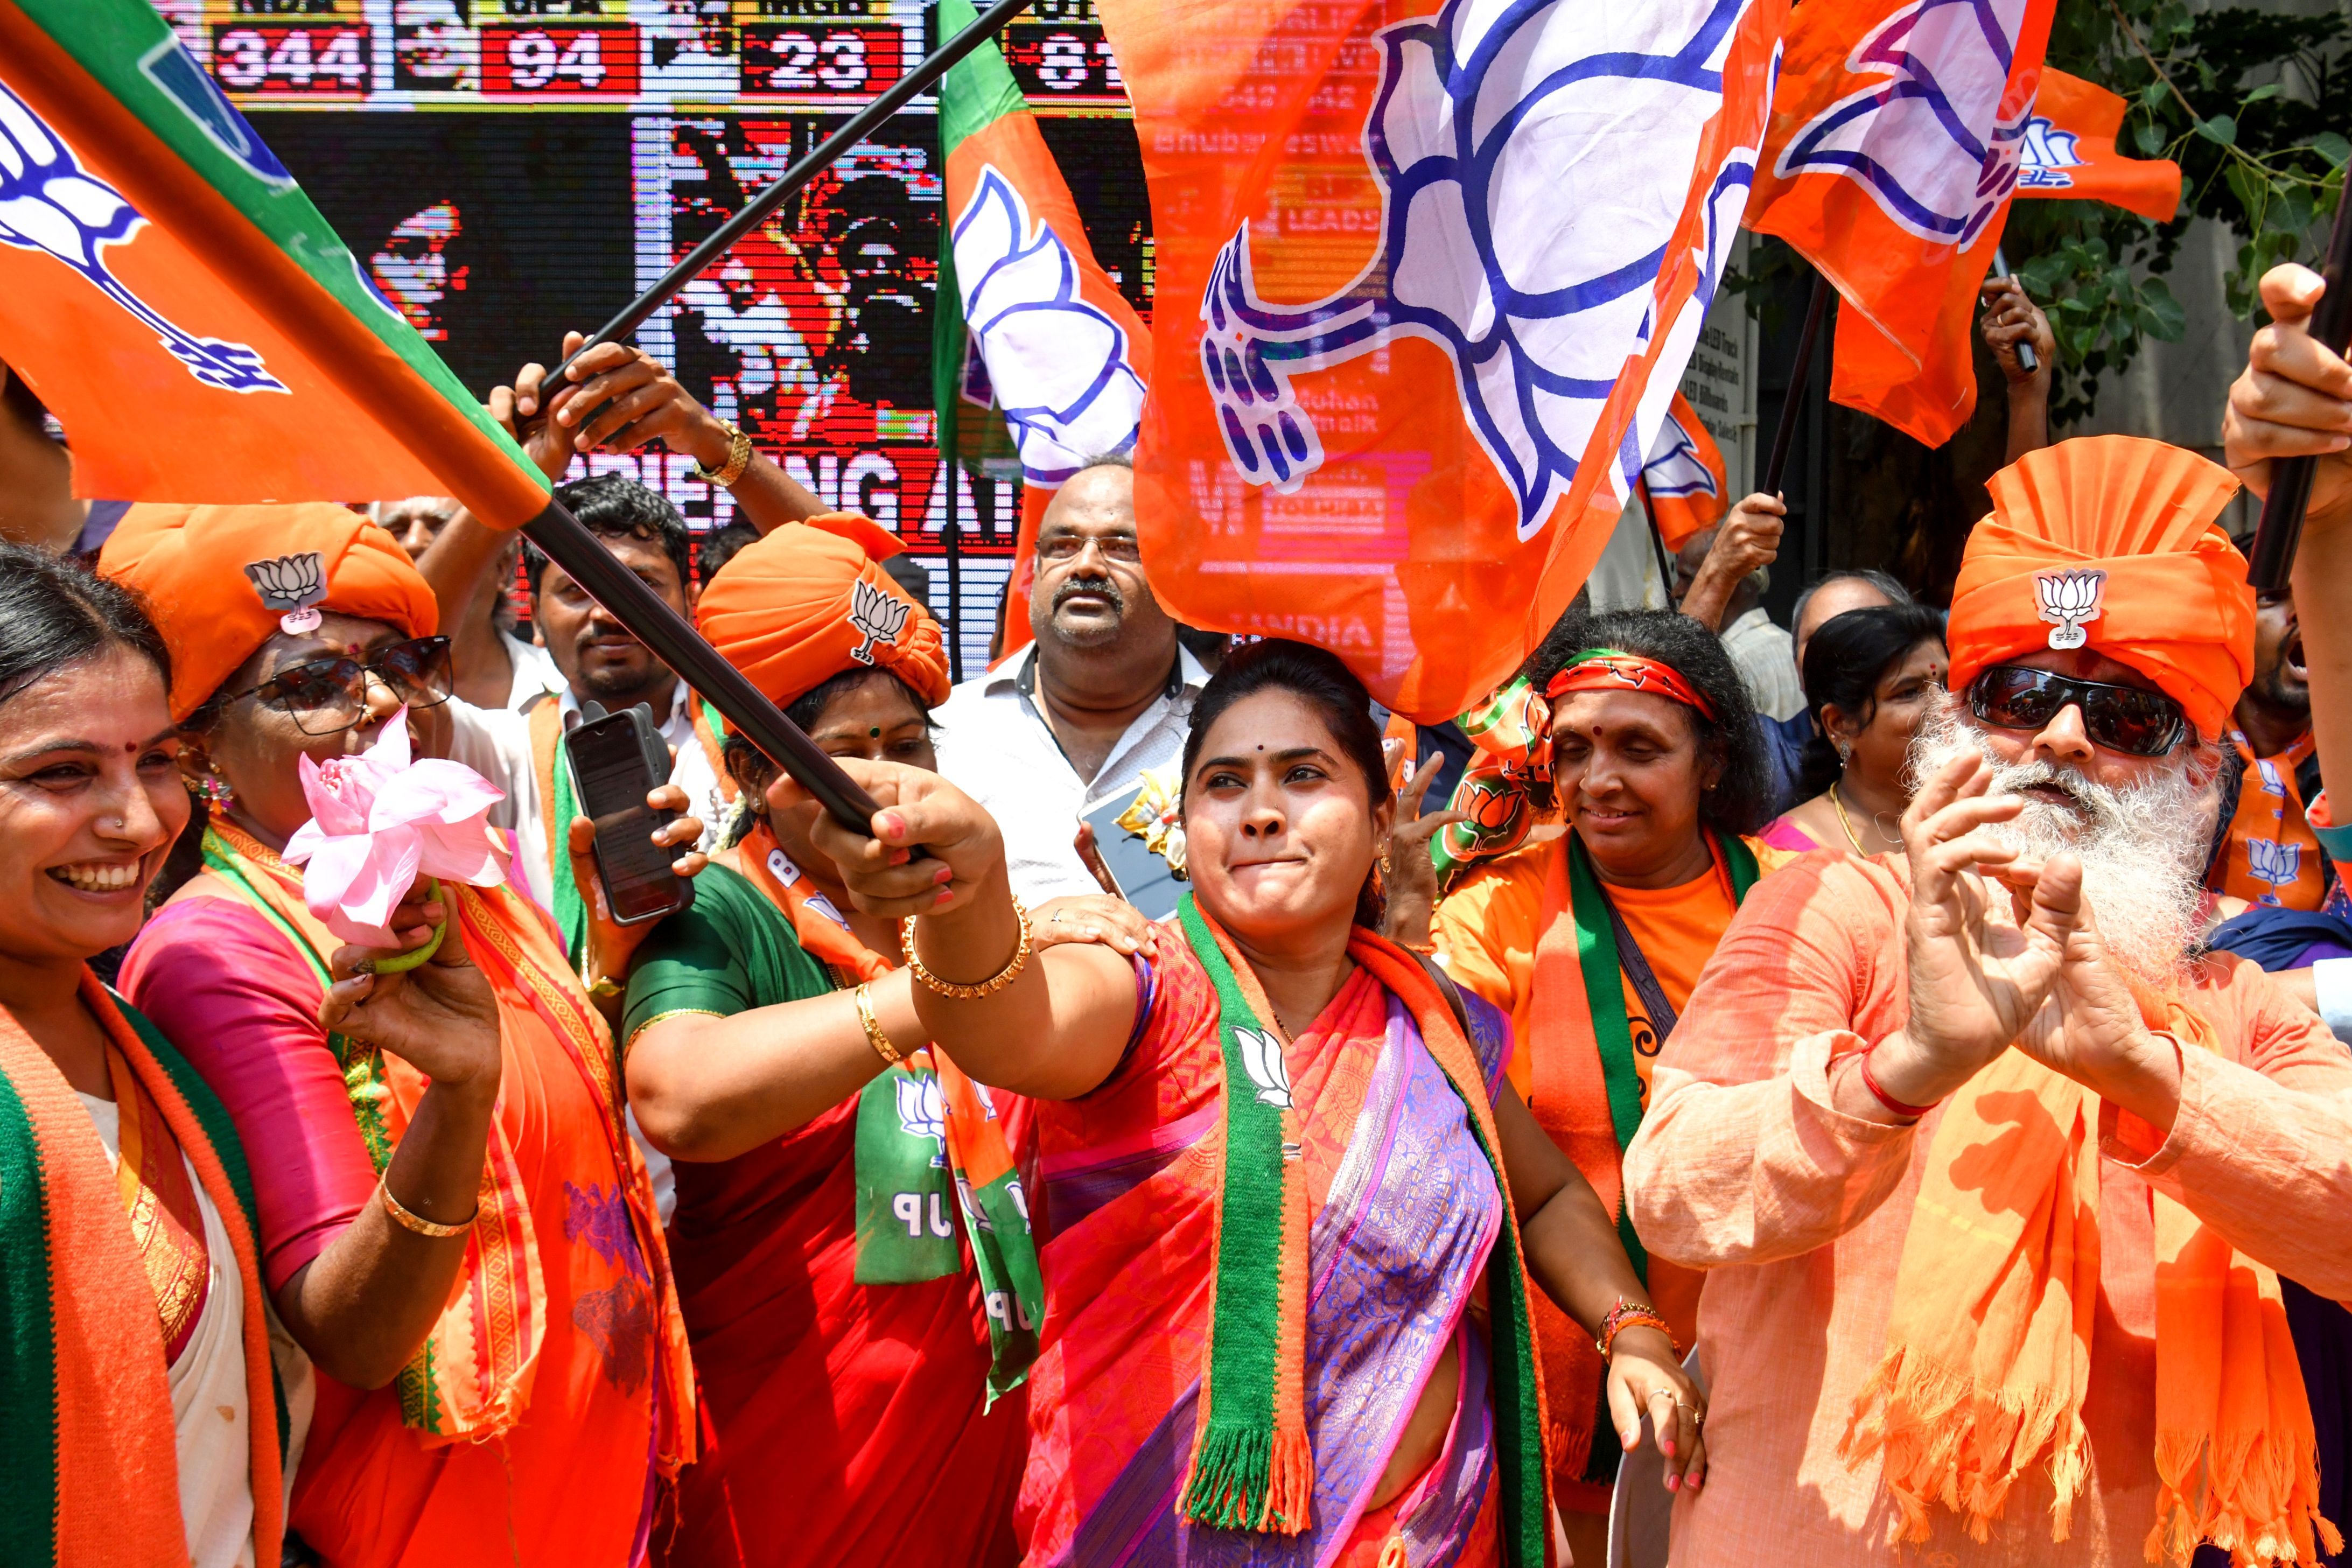 ndian supporters and party workers of Bharatiya Janata Party (BJP) dance and hold flags as they celebrate on the vote results day for India's general election in Bangalore on May 23, 2019. 